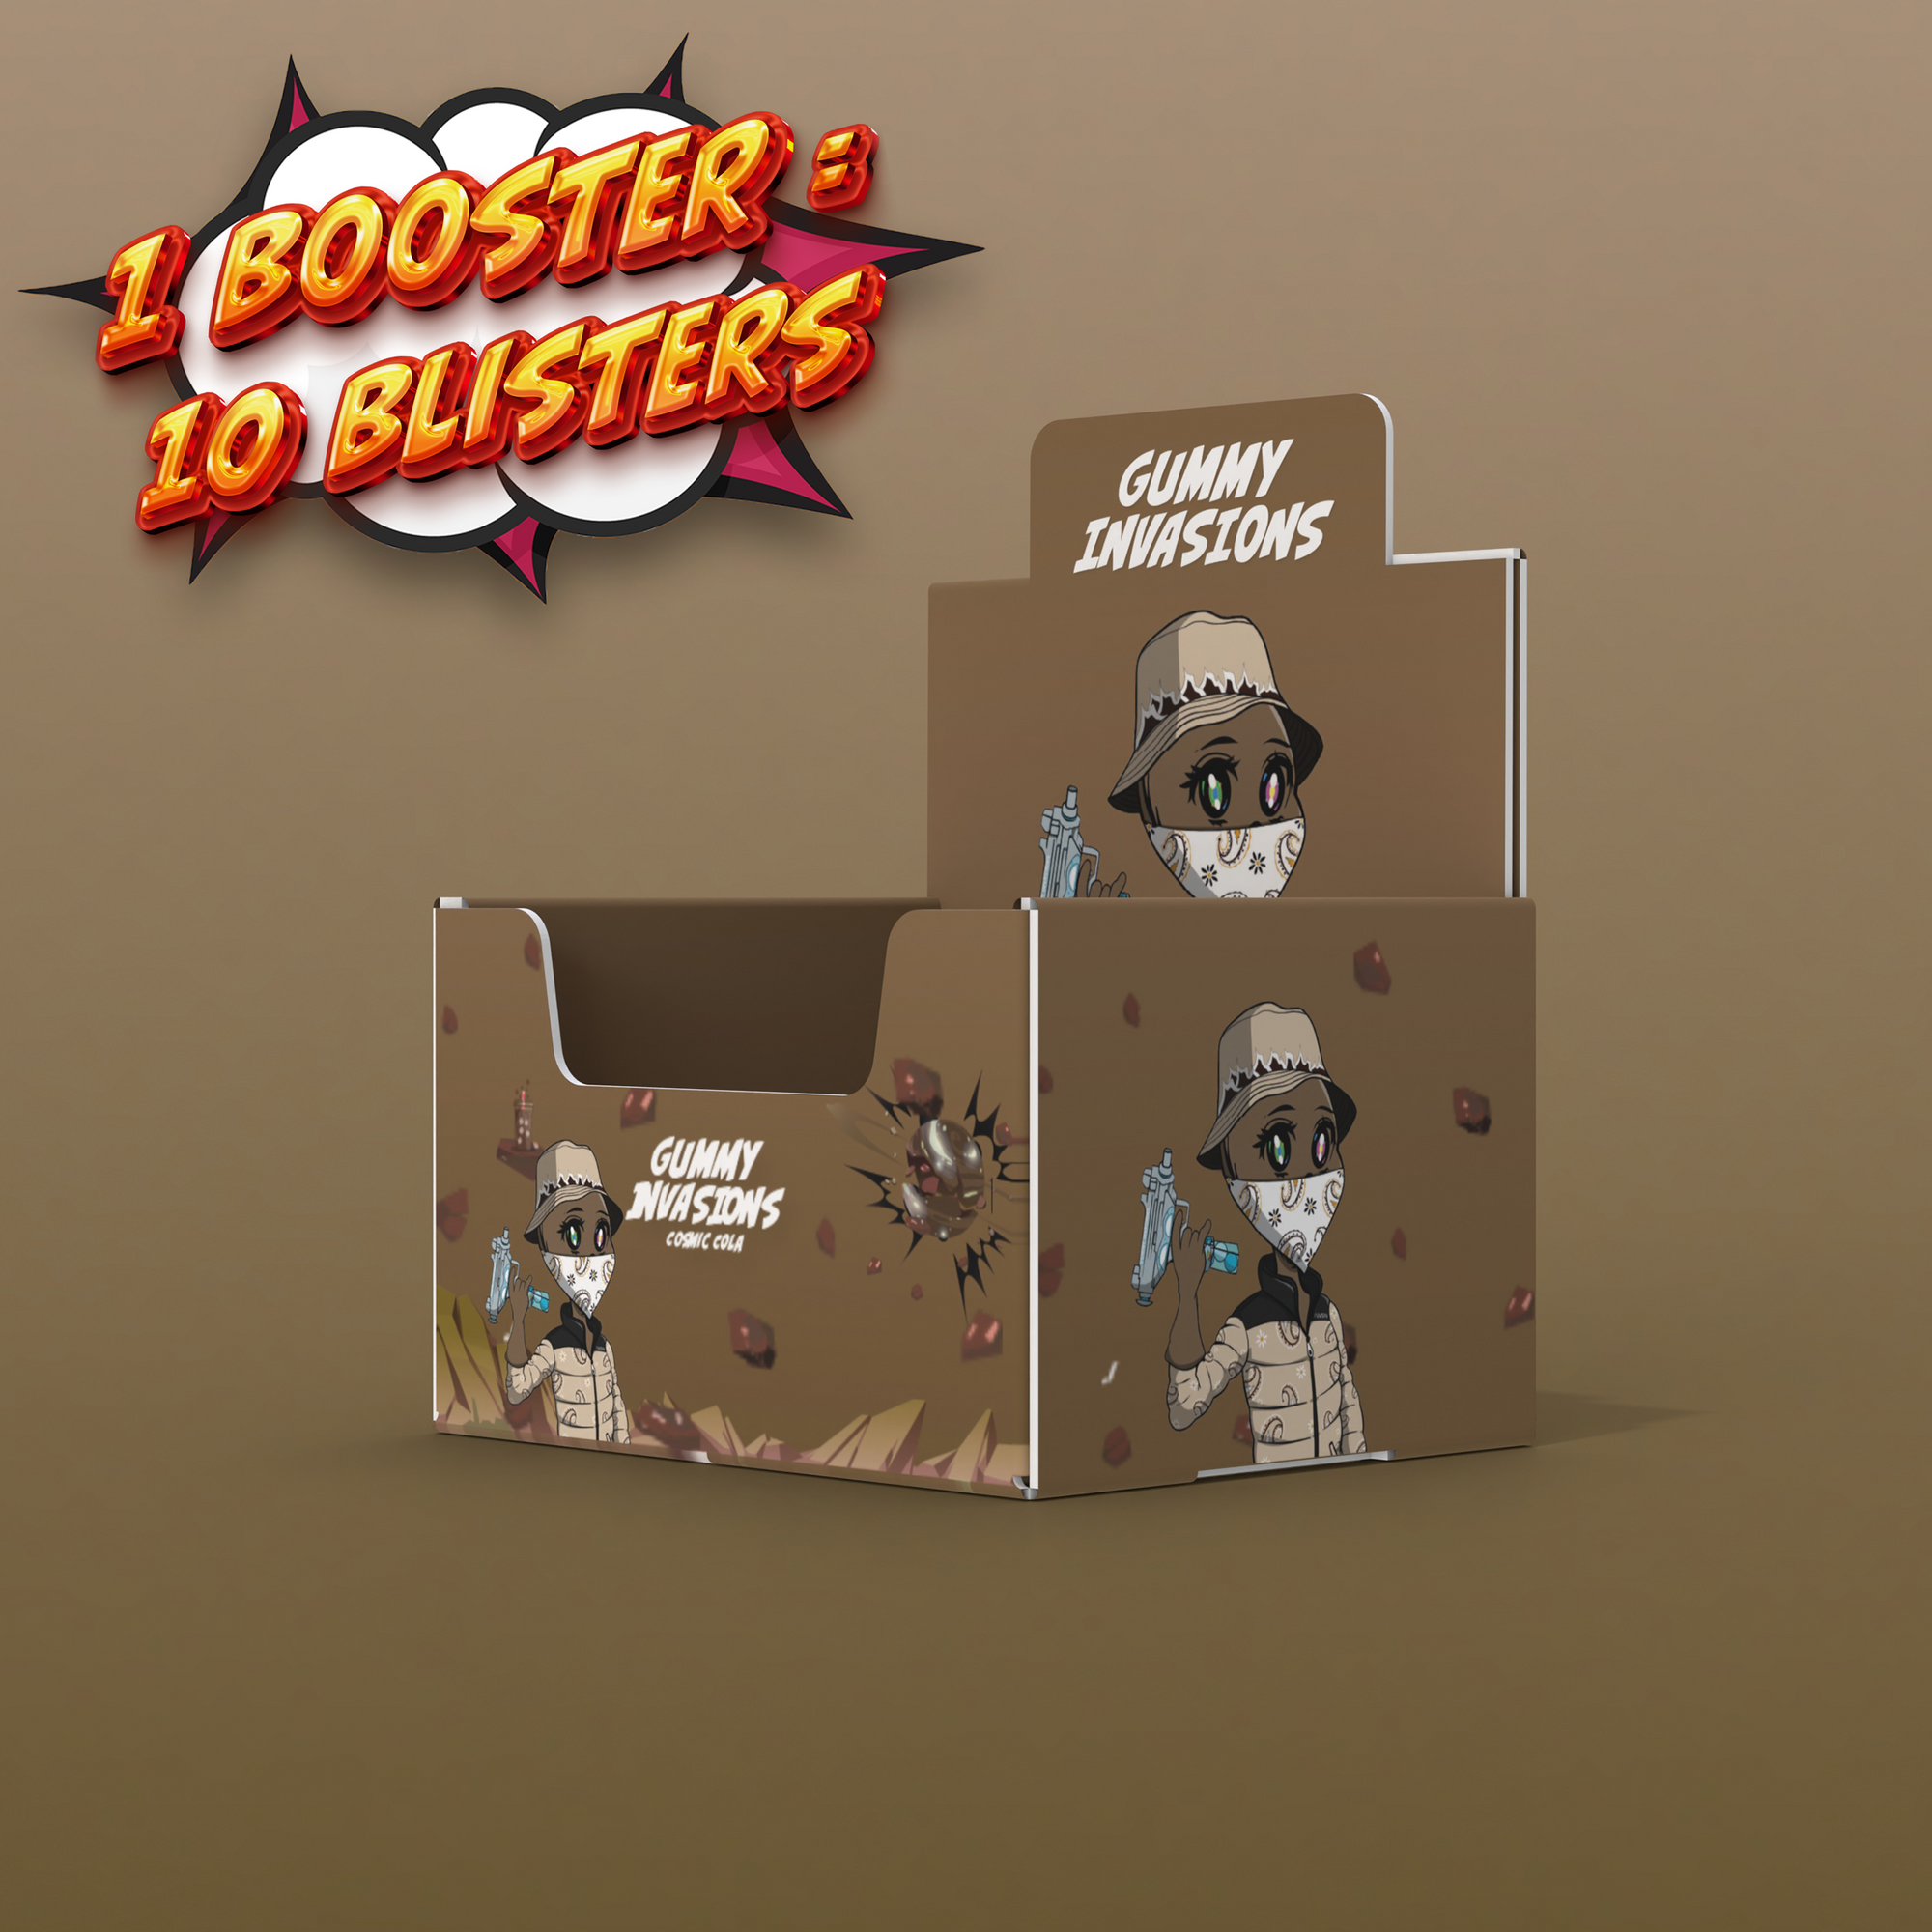 Cosmic Cola - 1 Booster (10 Blisters)